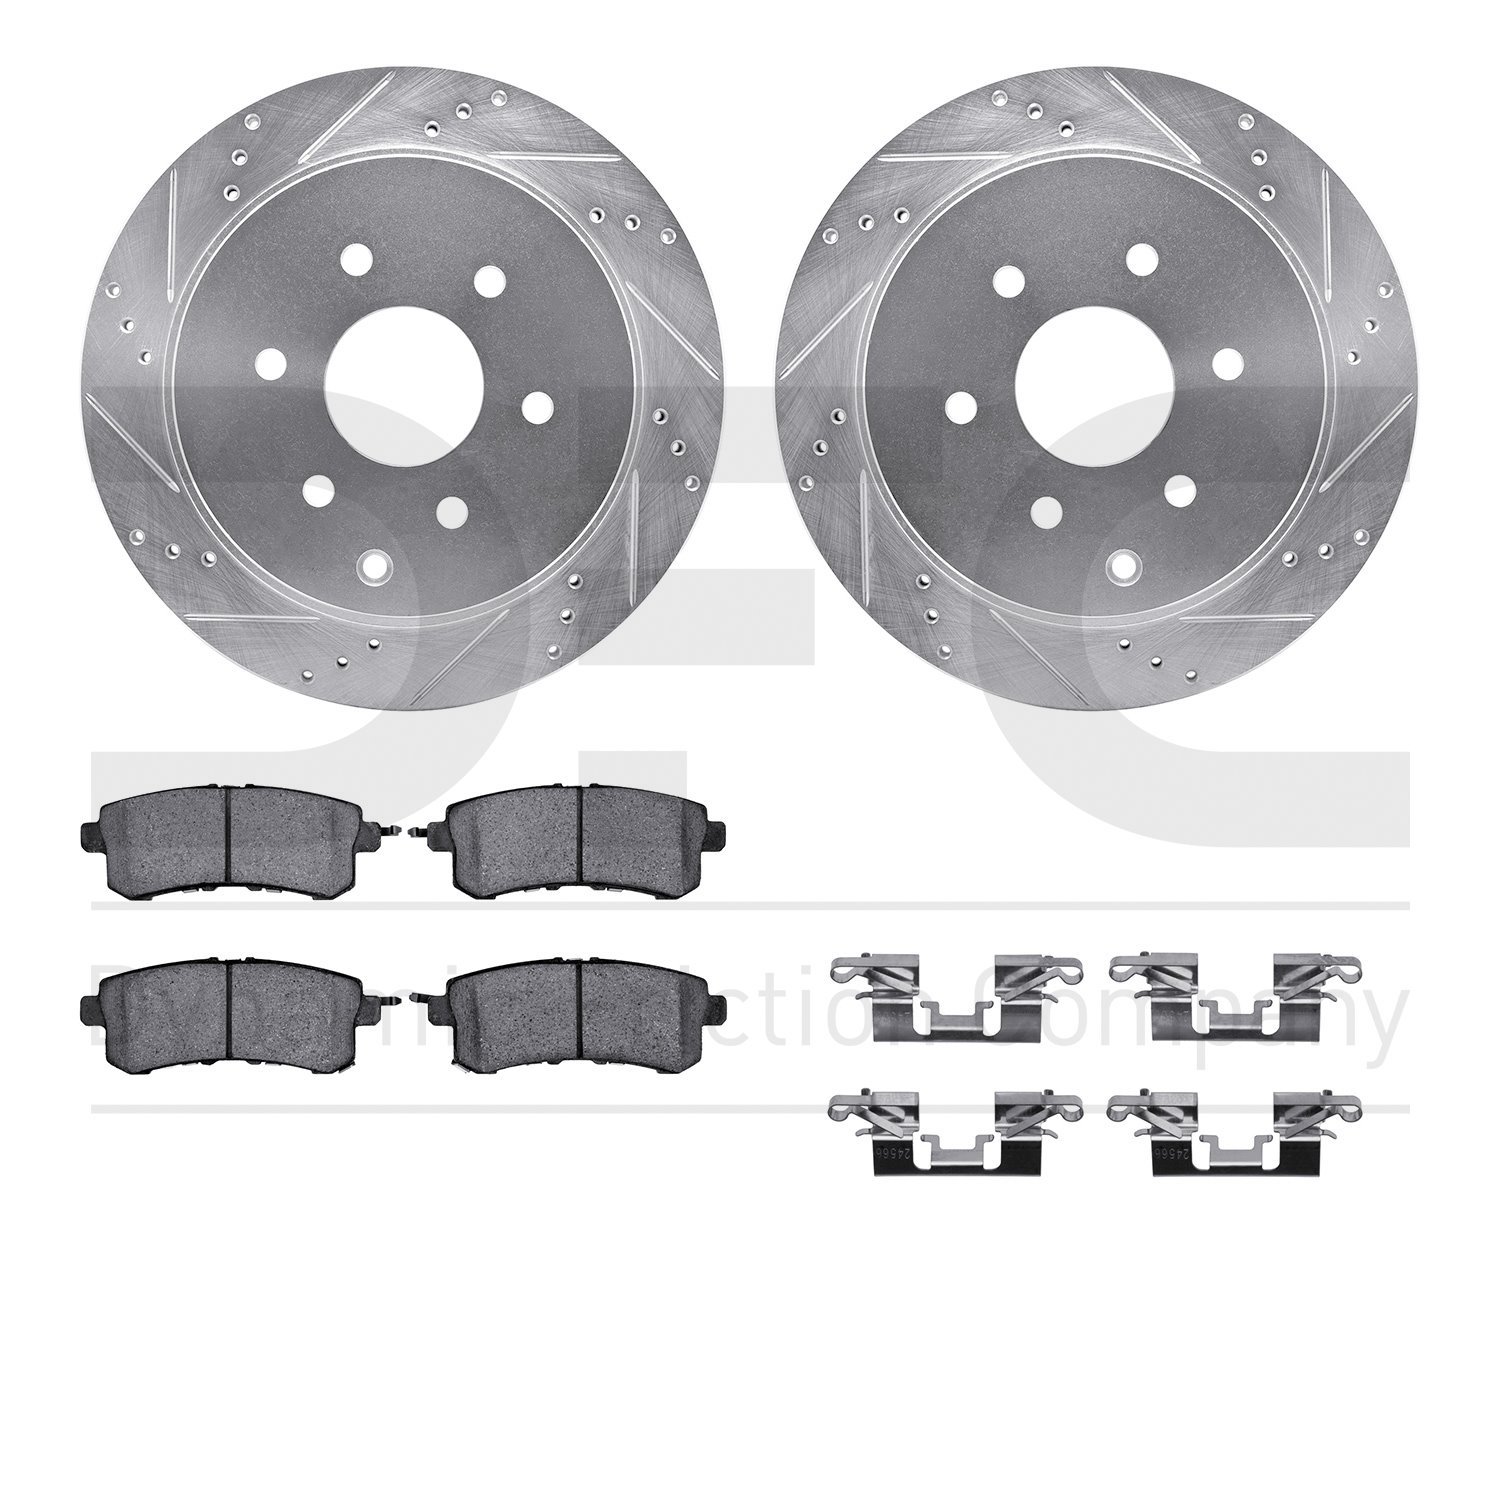 7512-68019 Drilled/Slotted Brake Rotors w/5000 Advanced Brake Pads Kit & Hardware [Silver], Fits Select Infiniti/Nissan, Positio